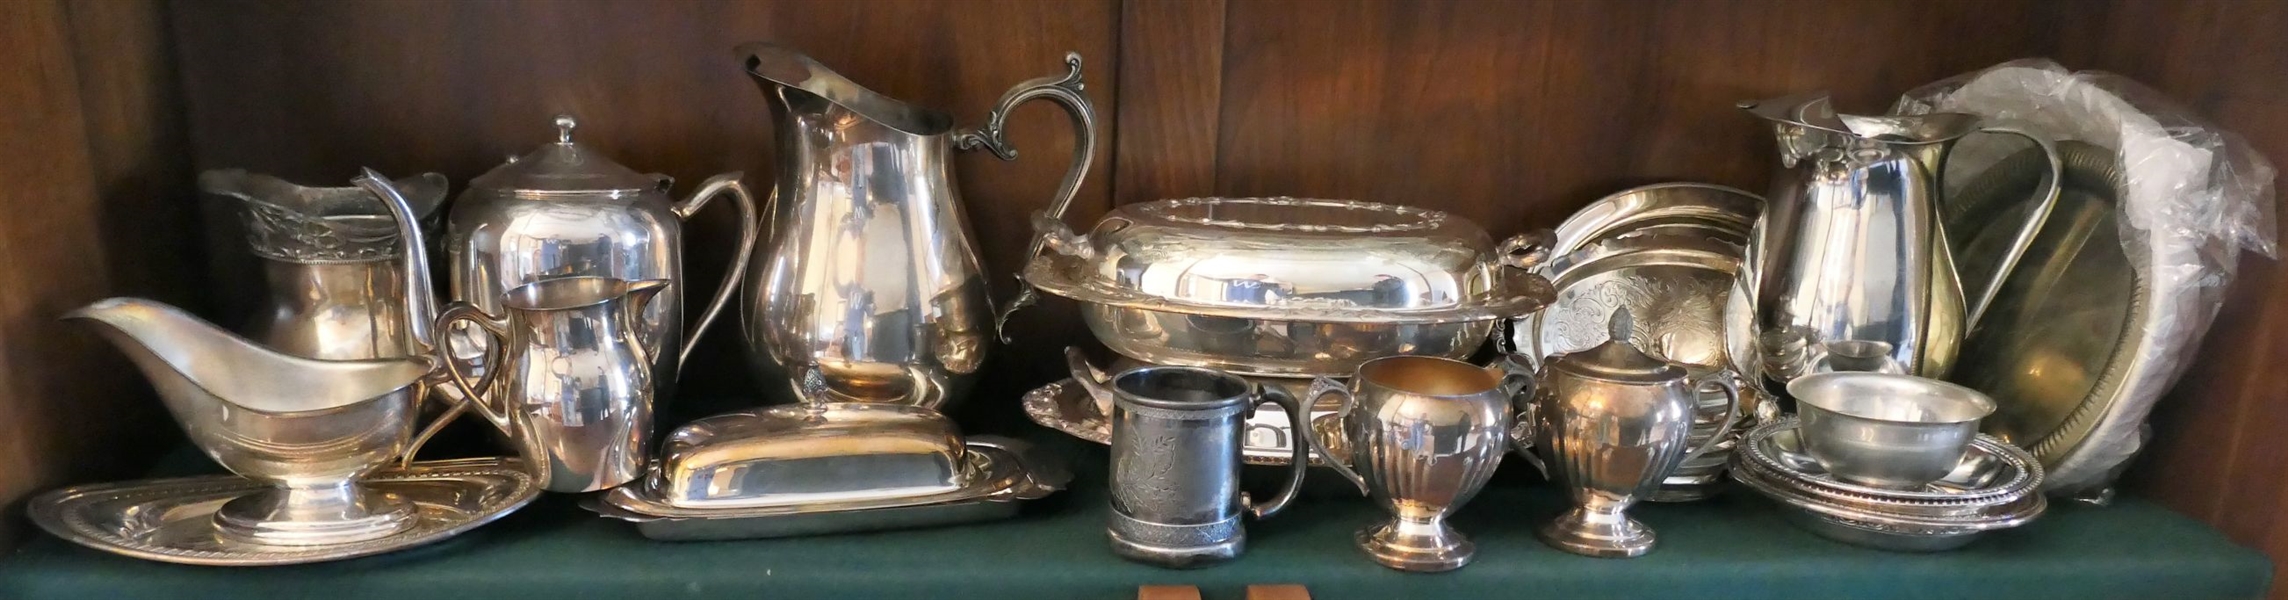 Shelf Lot of Silverplate Items - Pitchers, Tea Pots, Gravy Boats, Coasters, Covered Dishes, Butter Dish, Basket, and Coasters